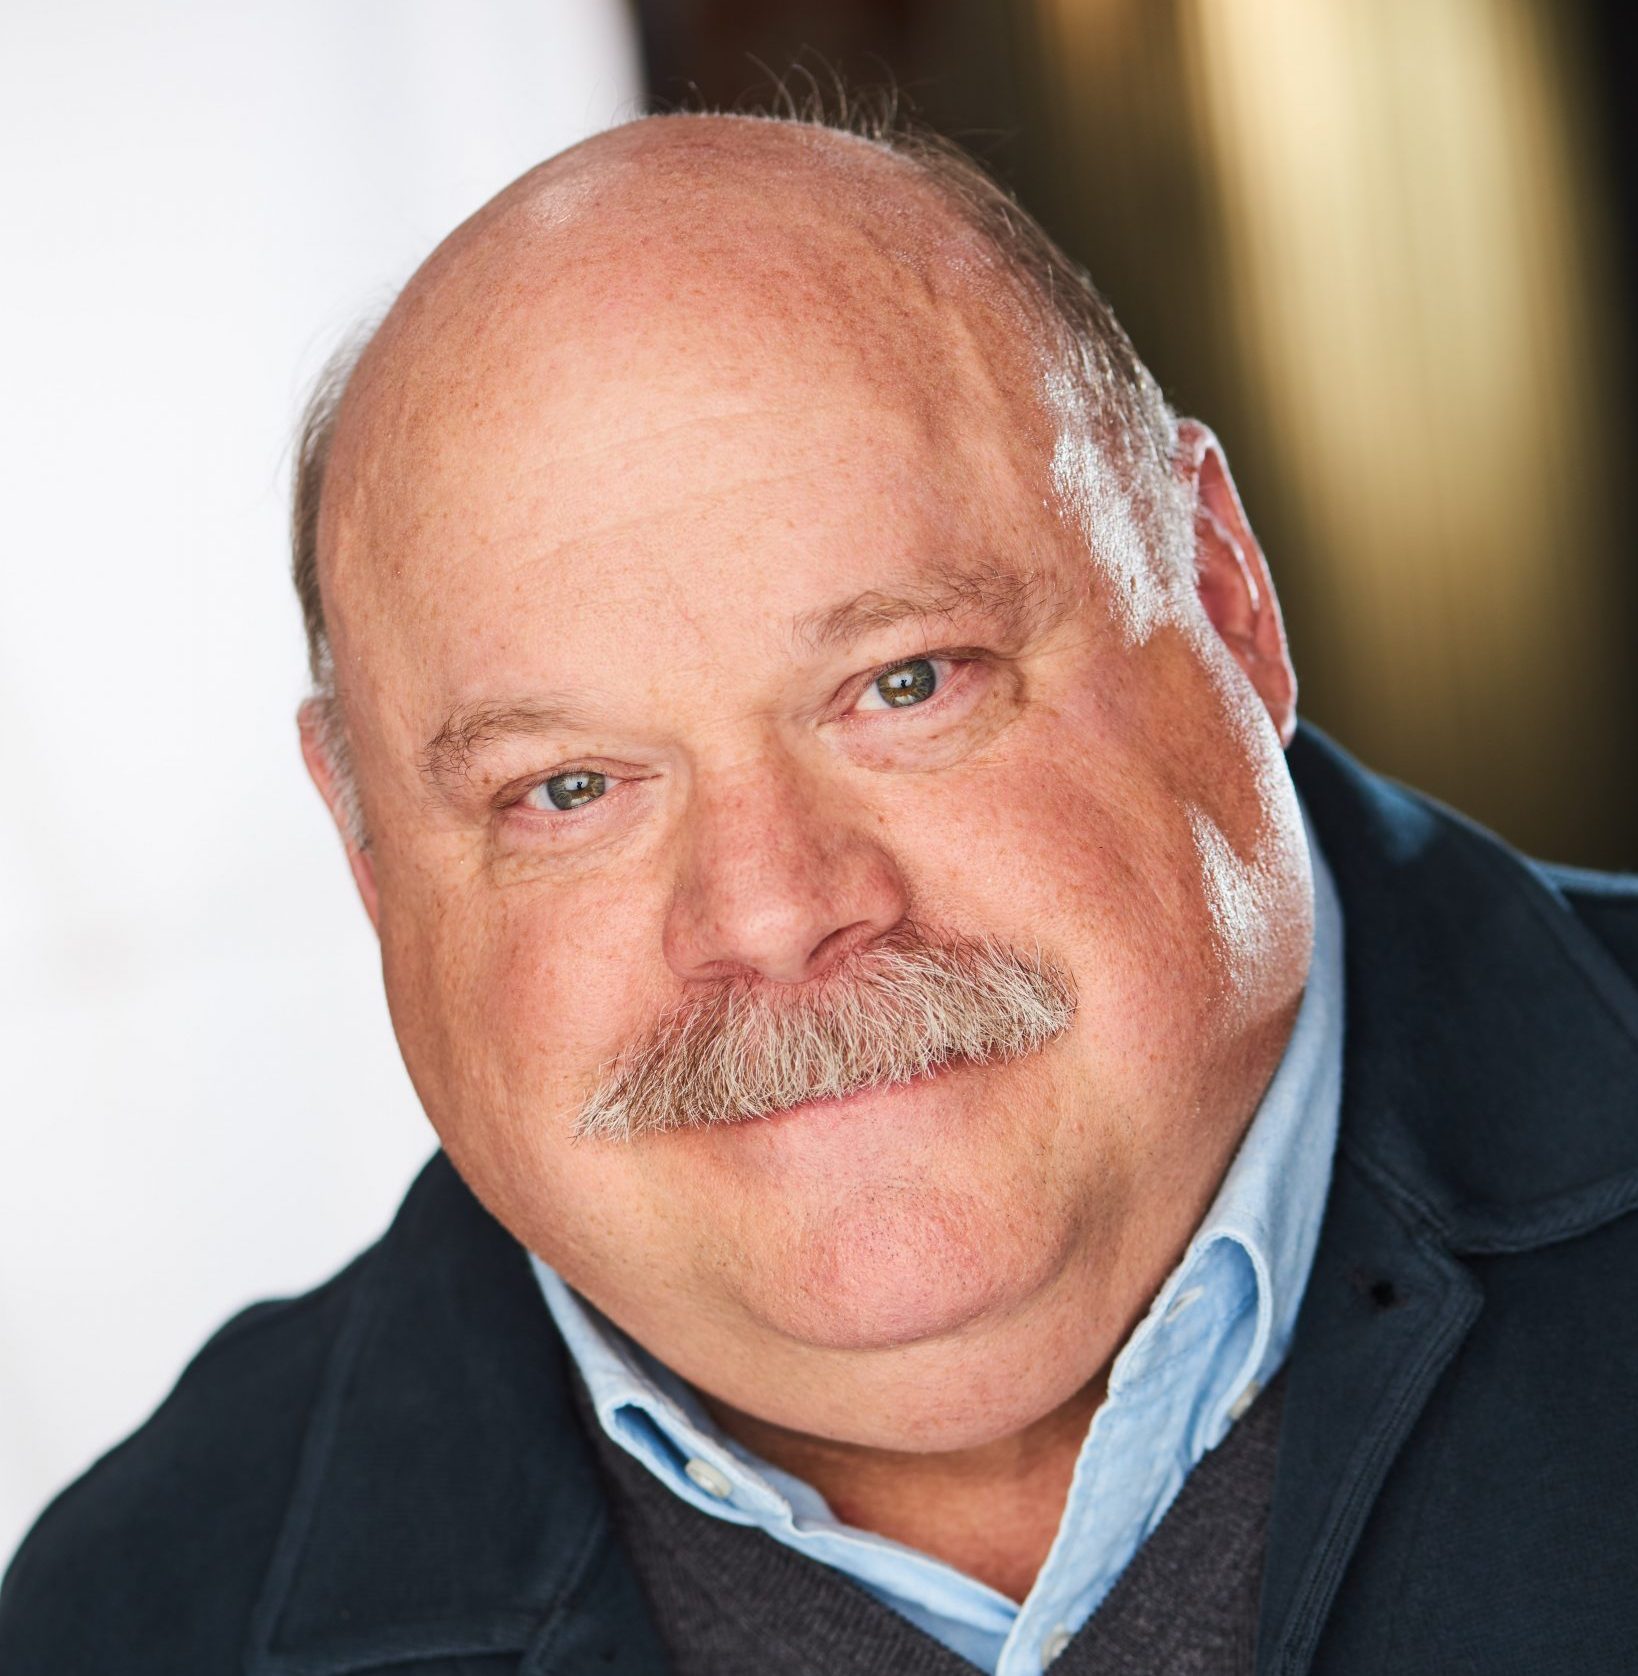 Kevin Chamberlin's Biography Death Rumors, Net Worth, Wife